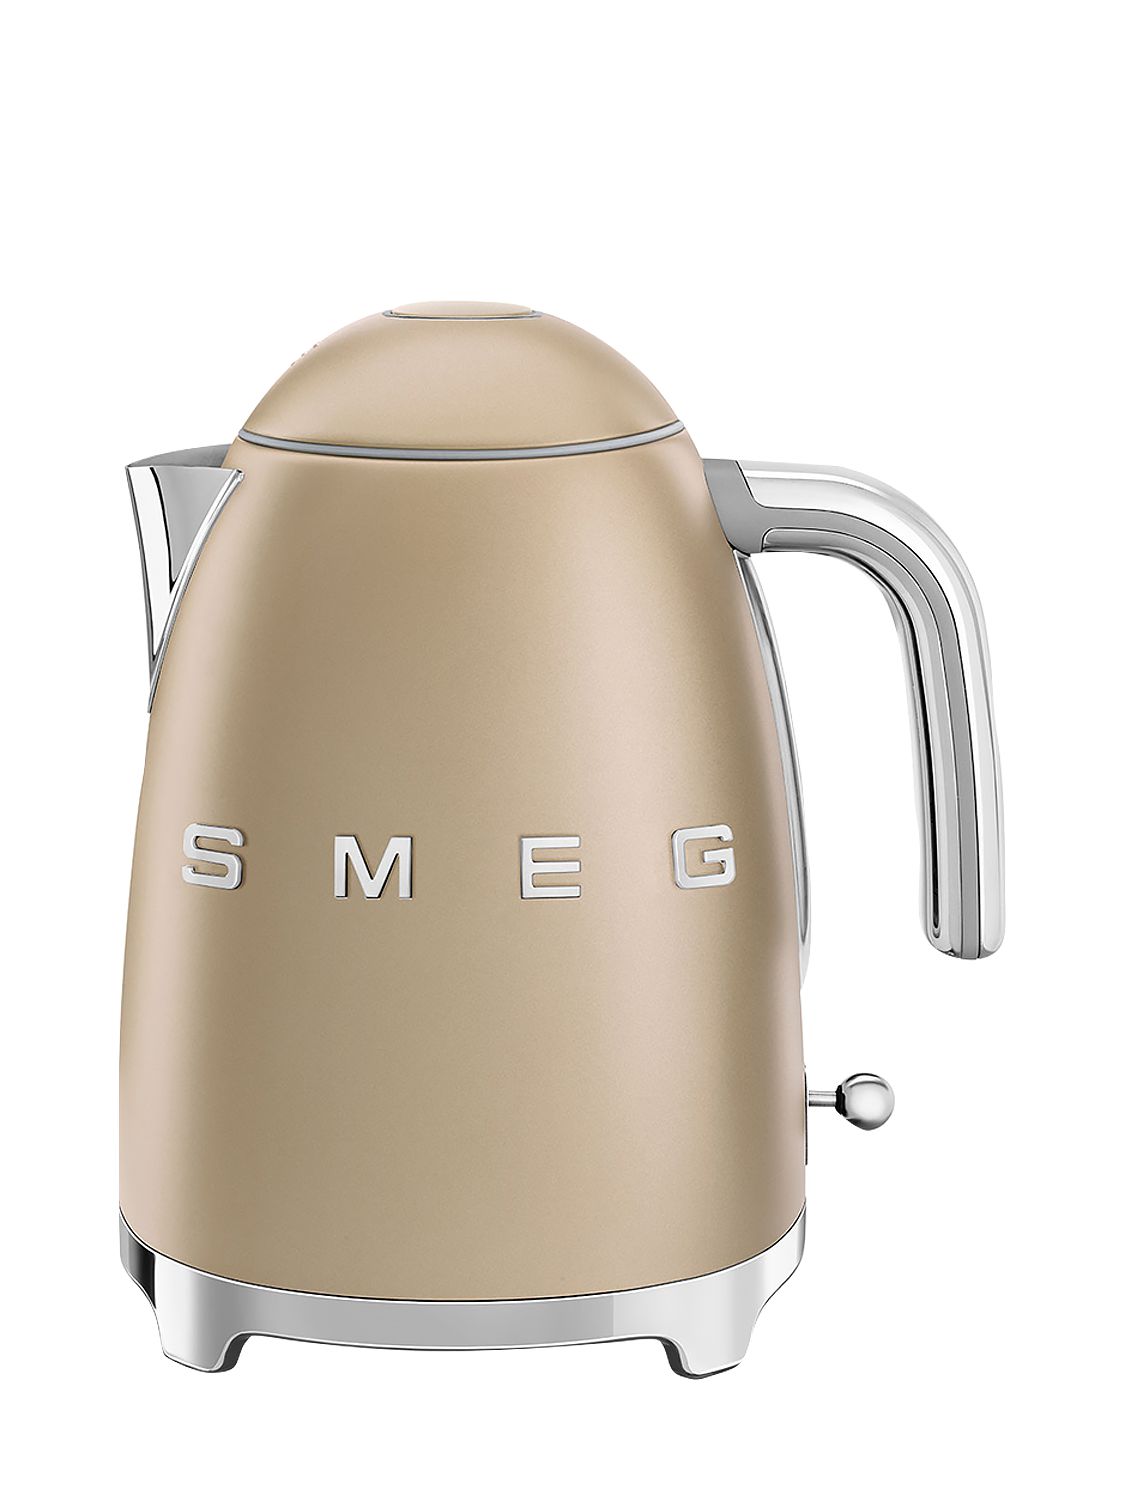 Smeg Oro Opaco Electric Kettle In Gold